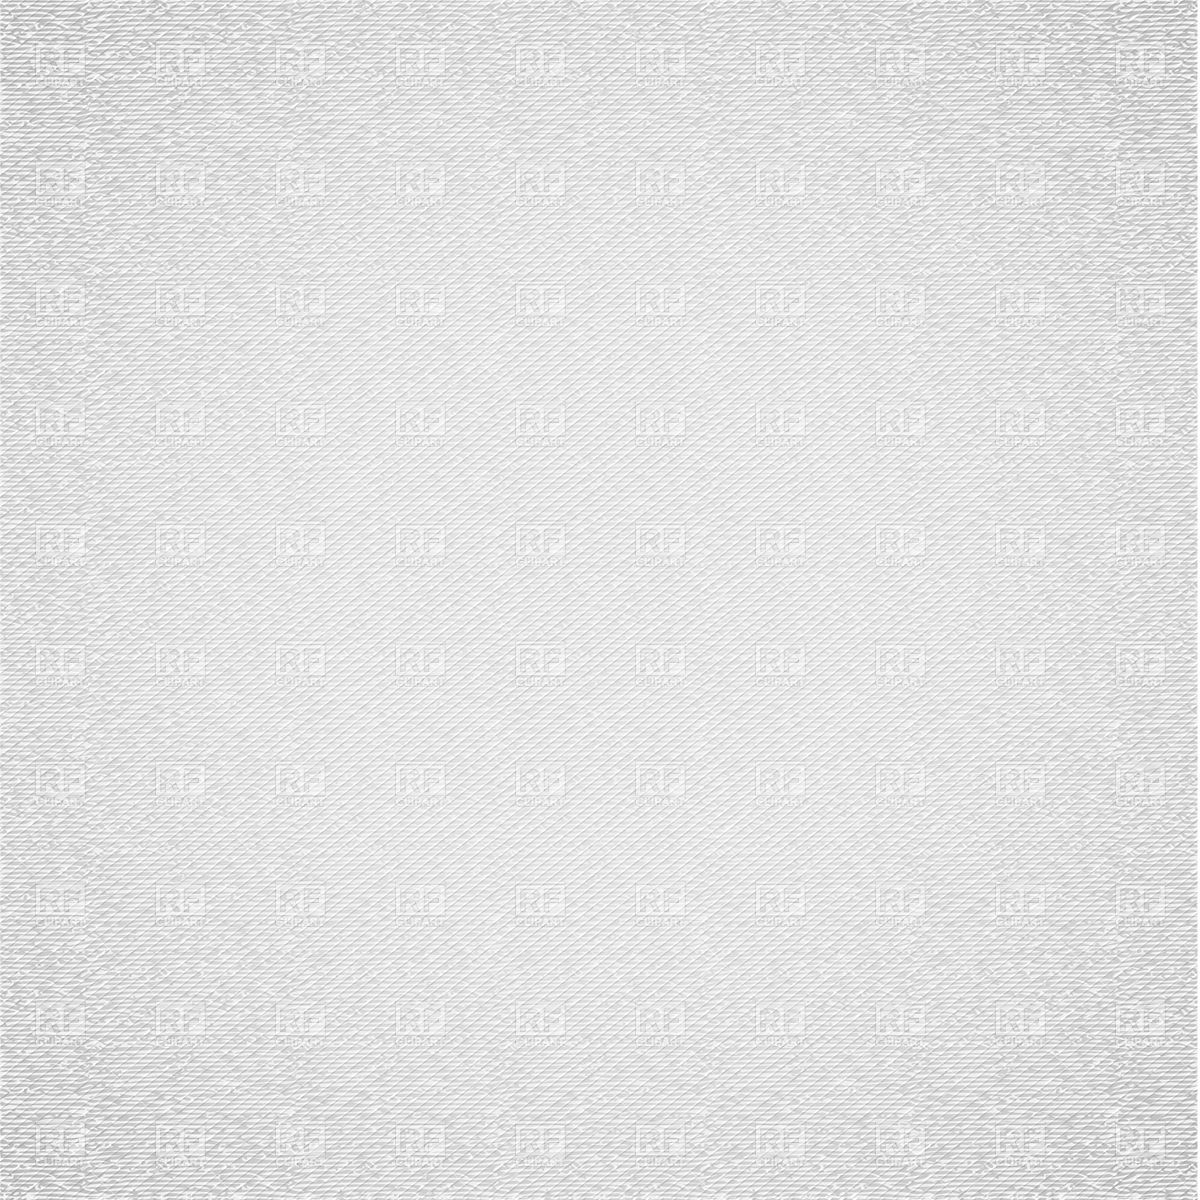 Light Gray Striped Cardboard Surface Download Royalty Free Vector